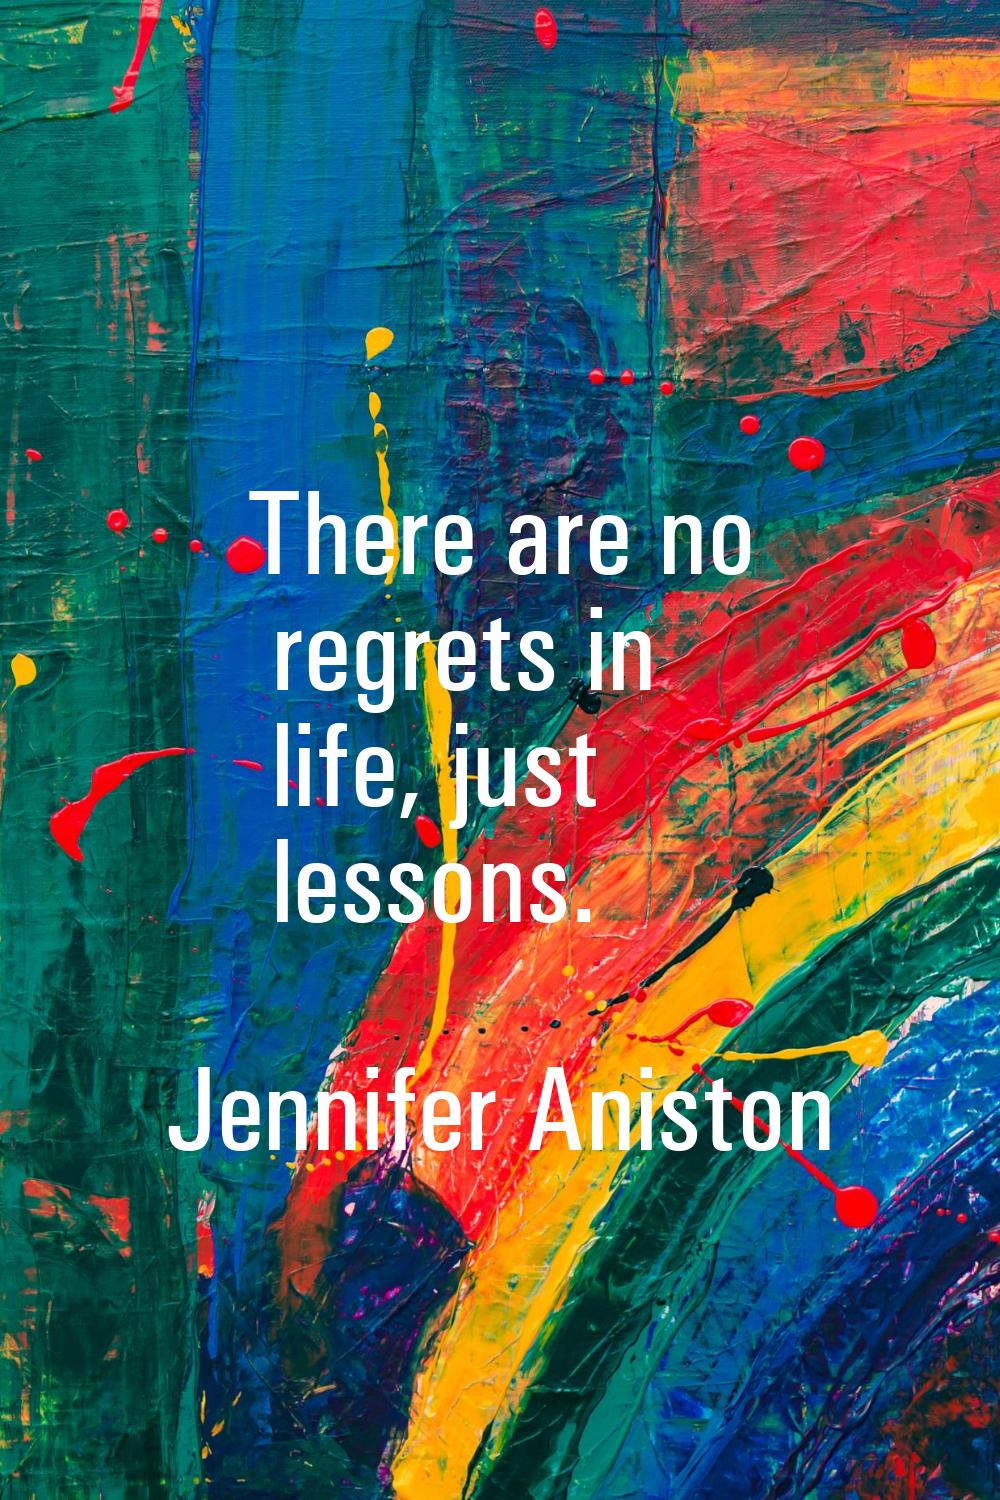 There are no regrets in life, just lessons.